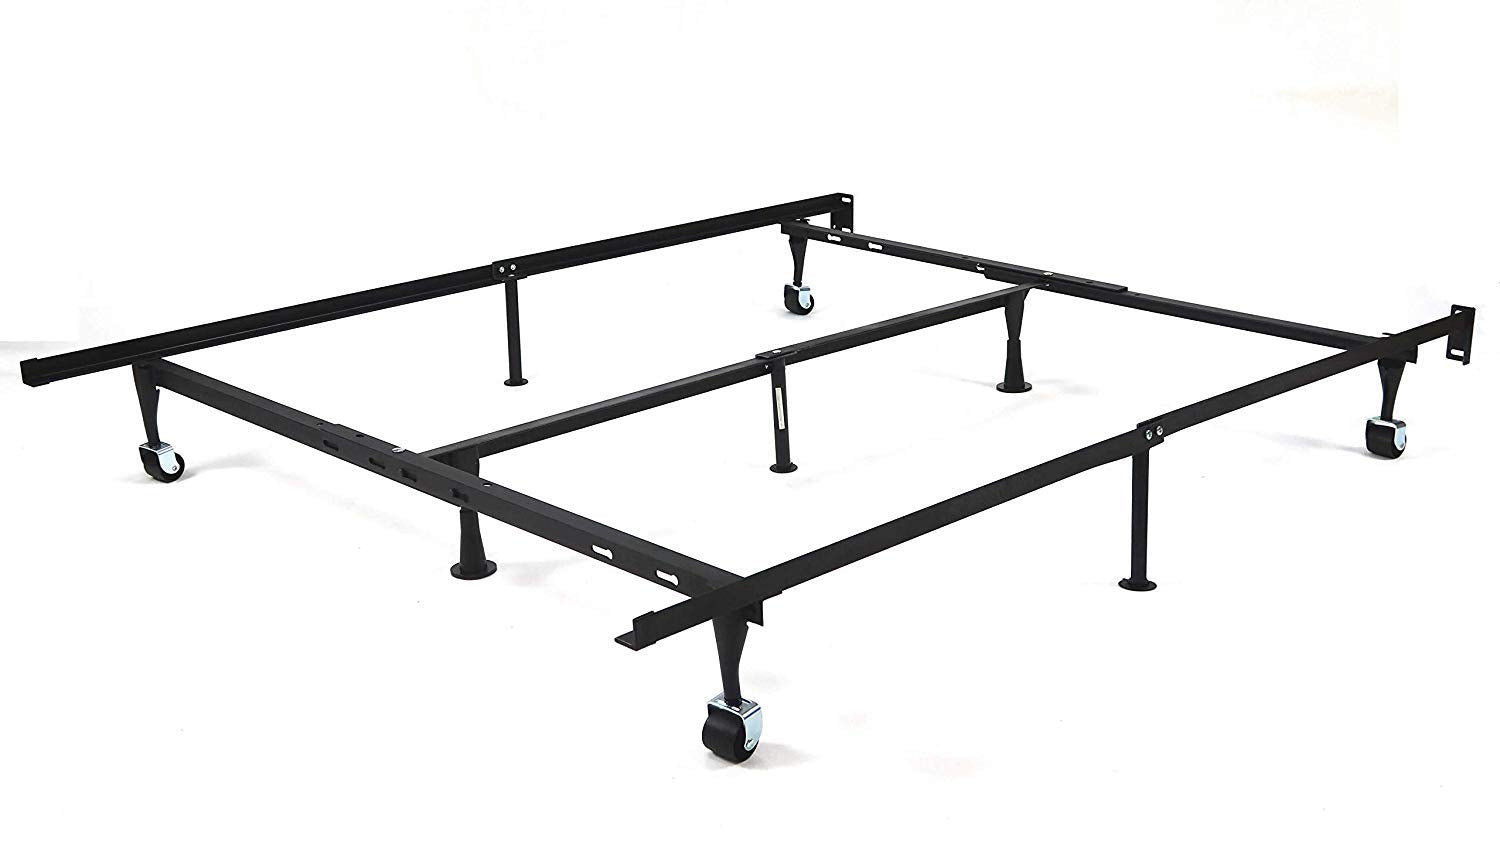 GTU Furniture 9-Leg Adjustable Heavy-Duty Steel Bed Frame Support with Center Support, for Box Spring & Mattress Set, Fits Twin/TXL/Full/Queen